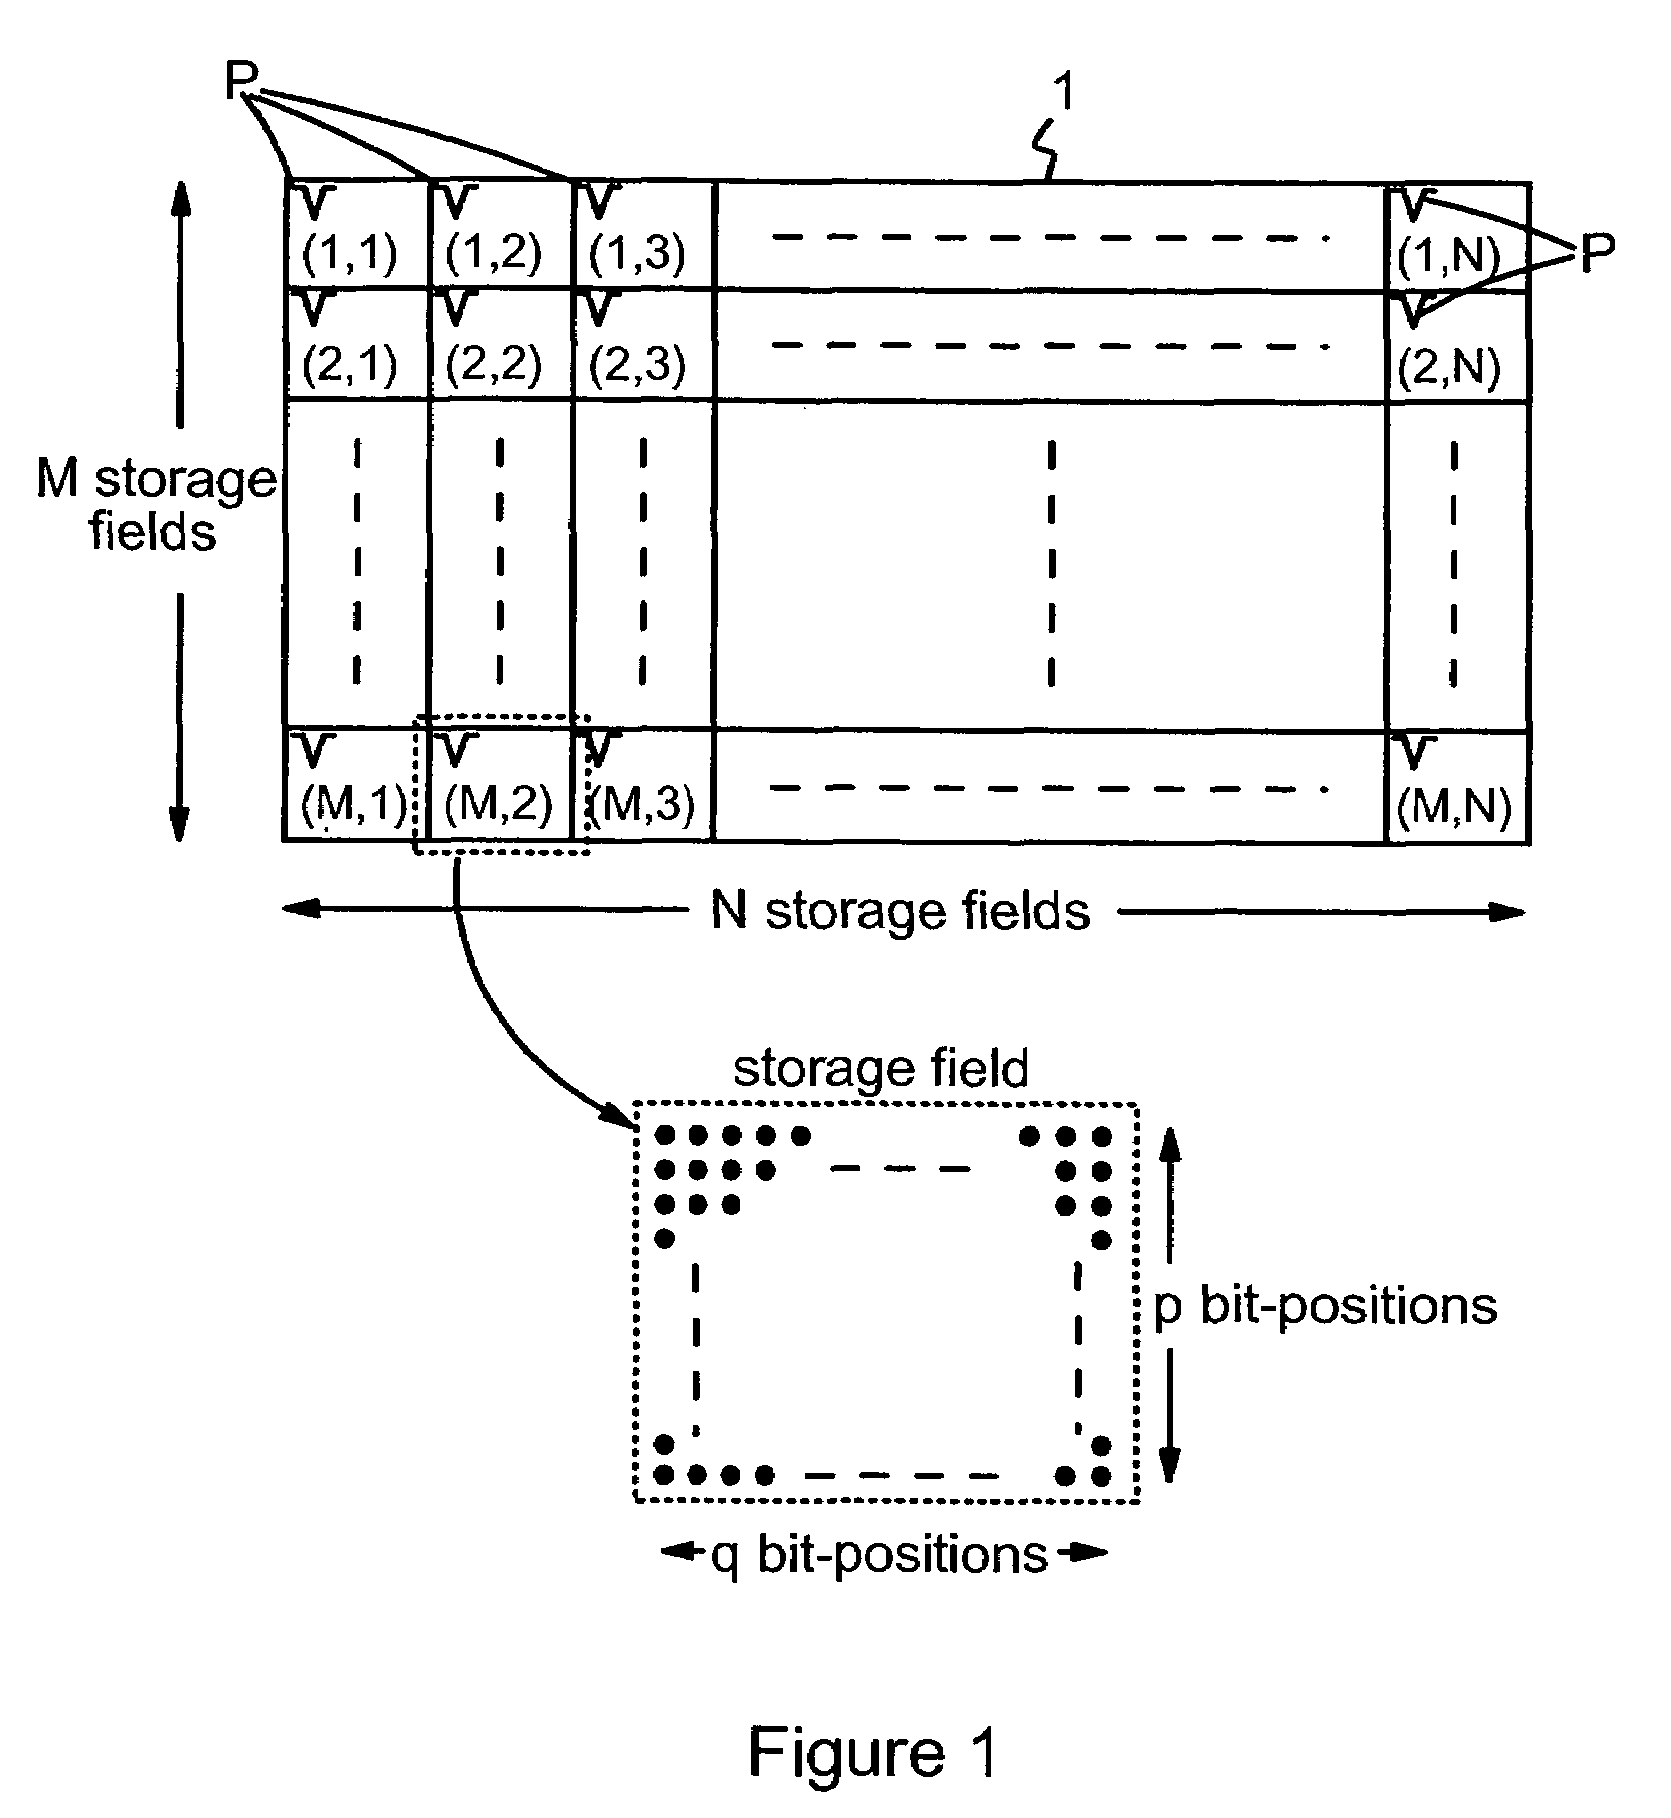 Writing and reading of data in probe-based data storage devices